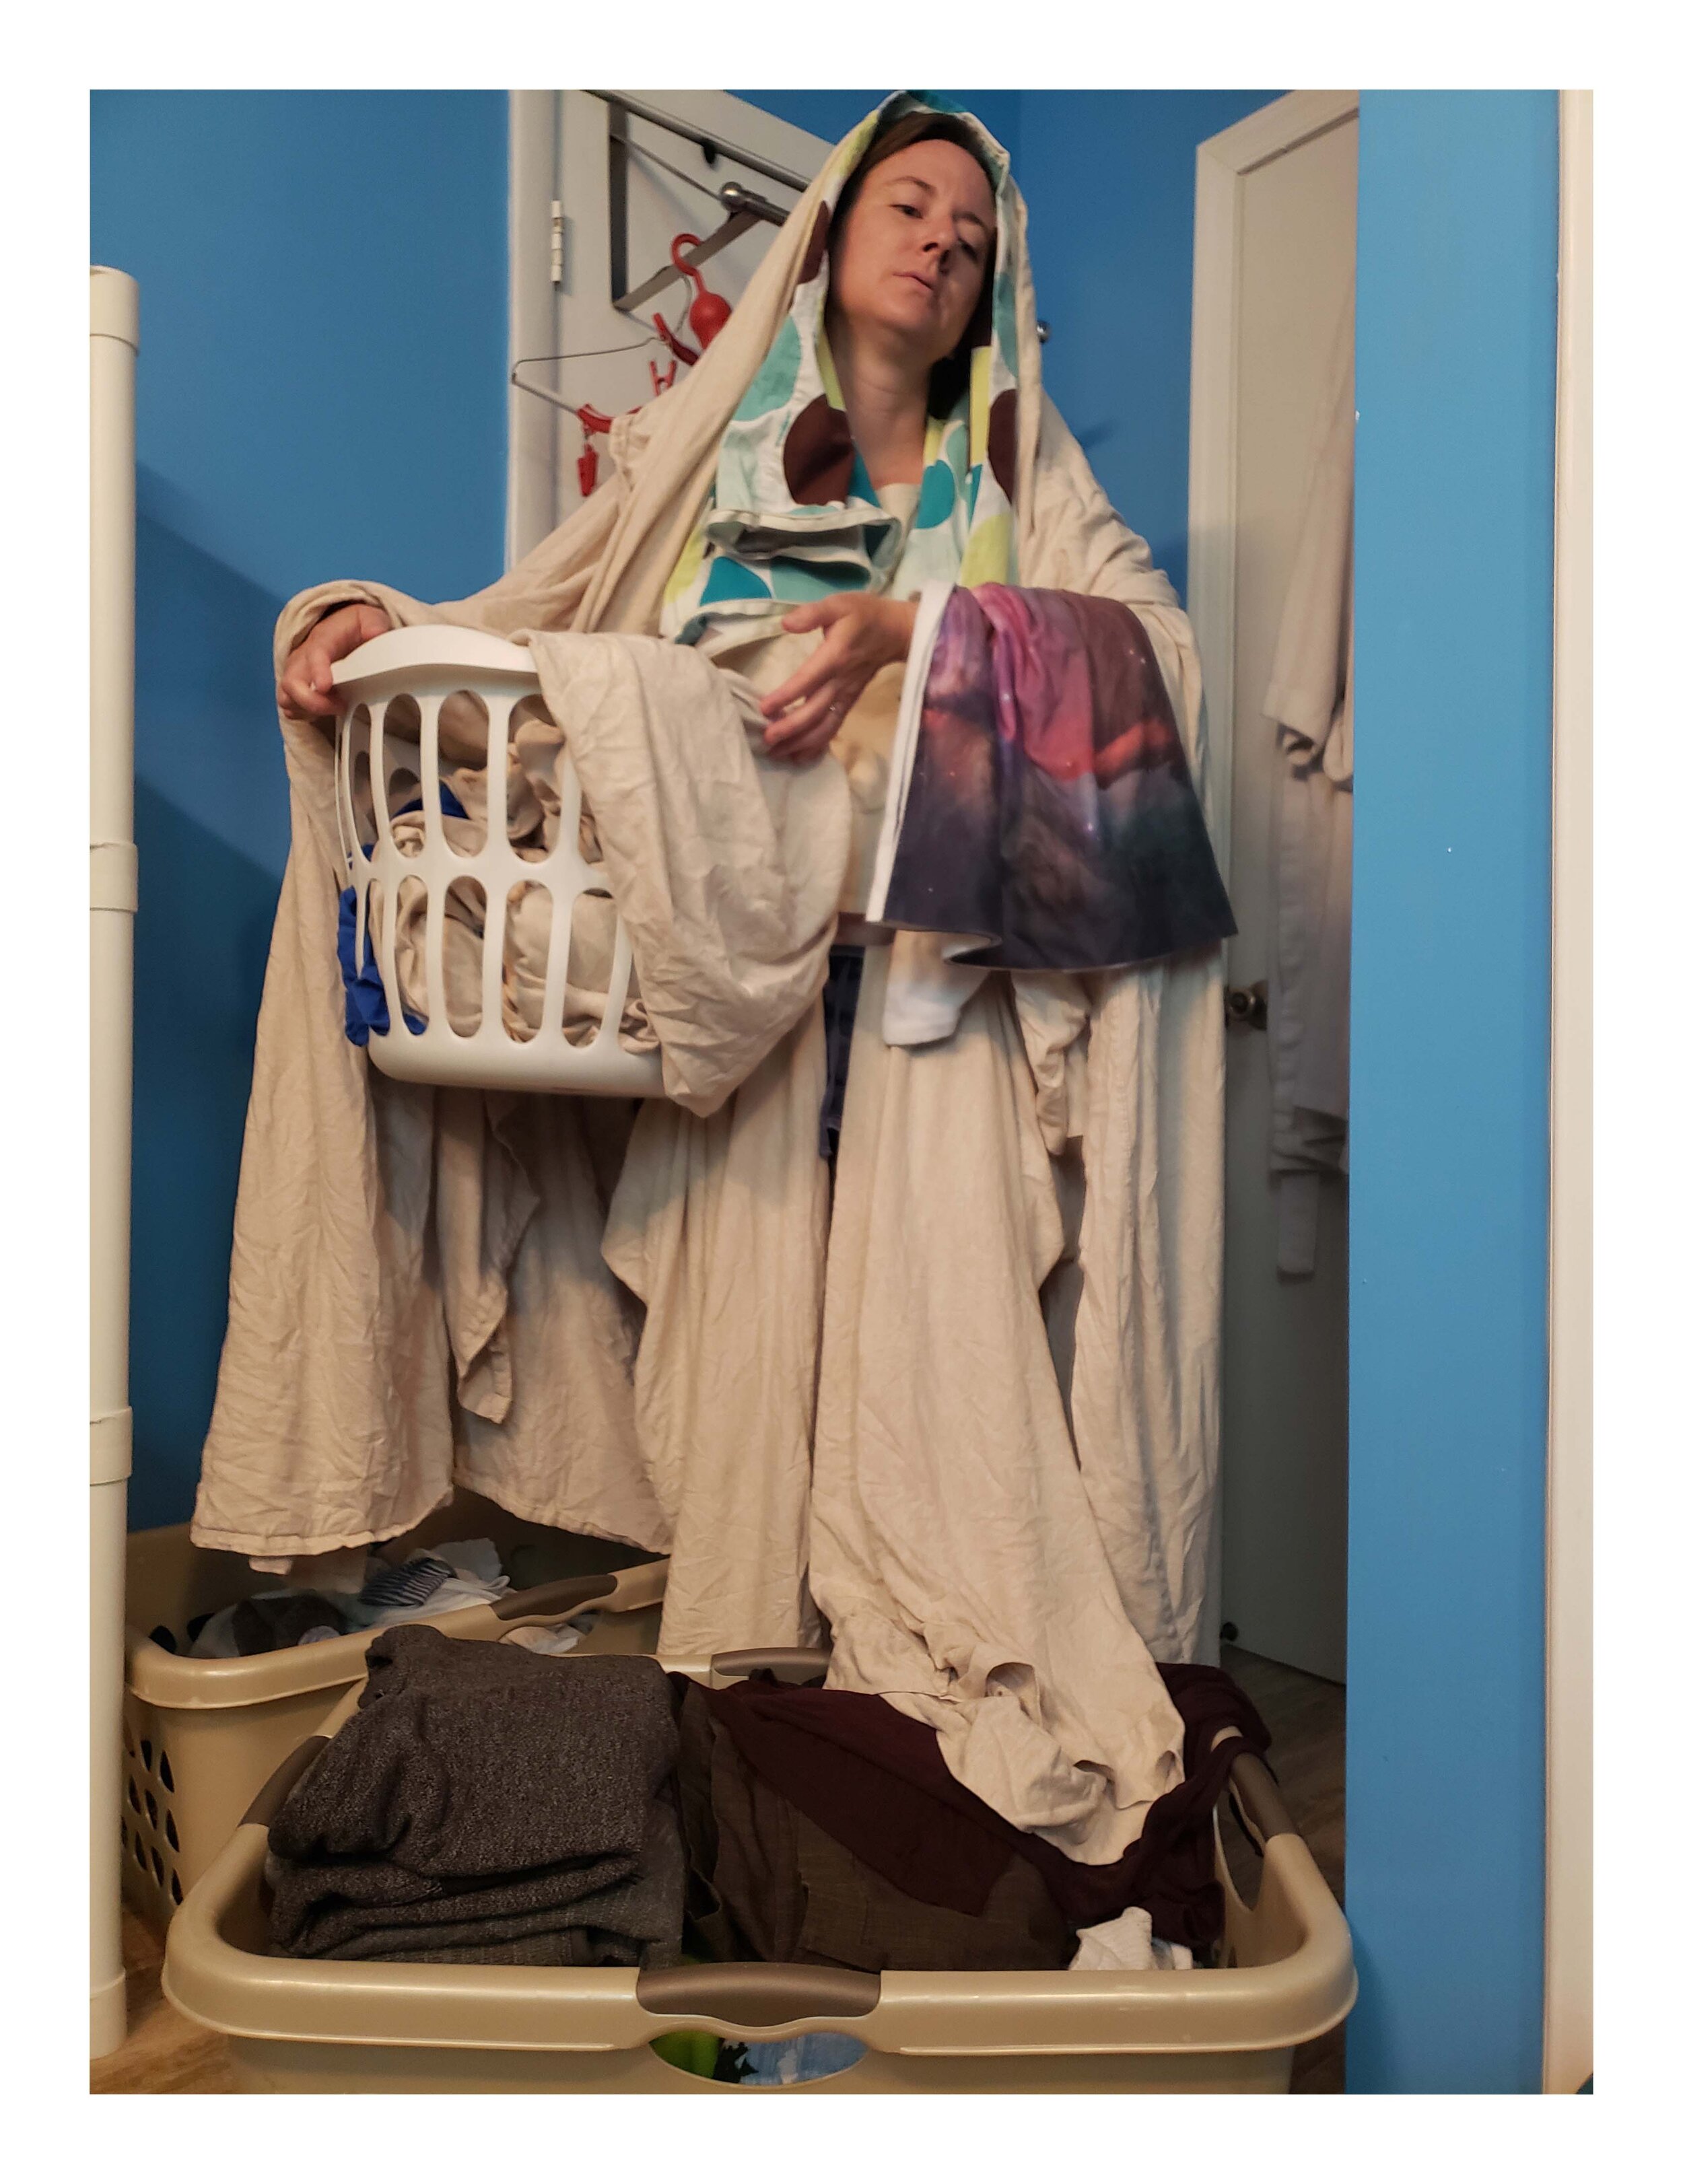 Our Lady of Perpetual Laundry.jpg